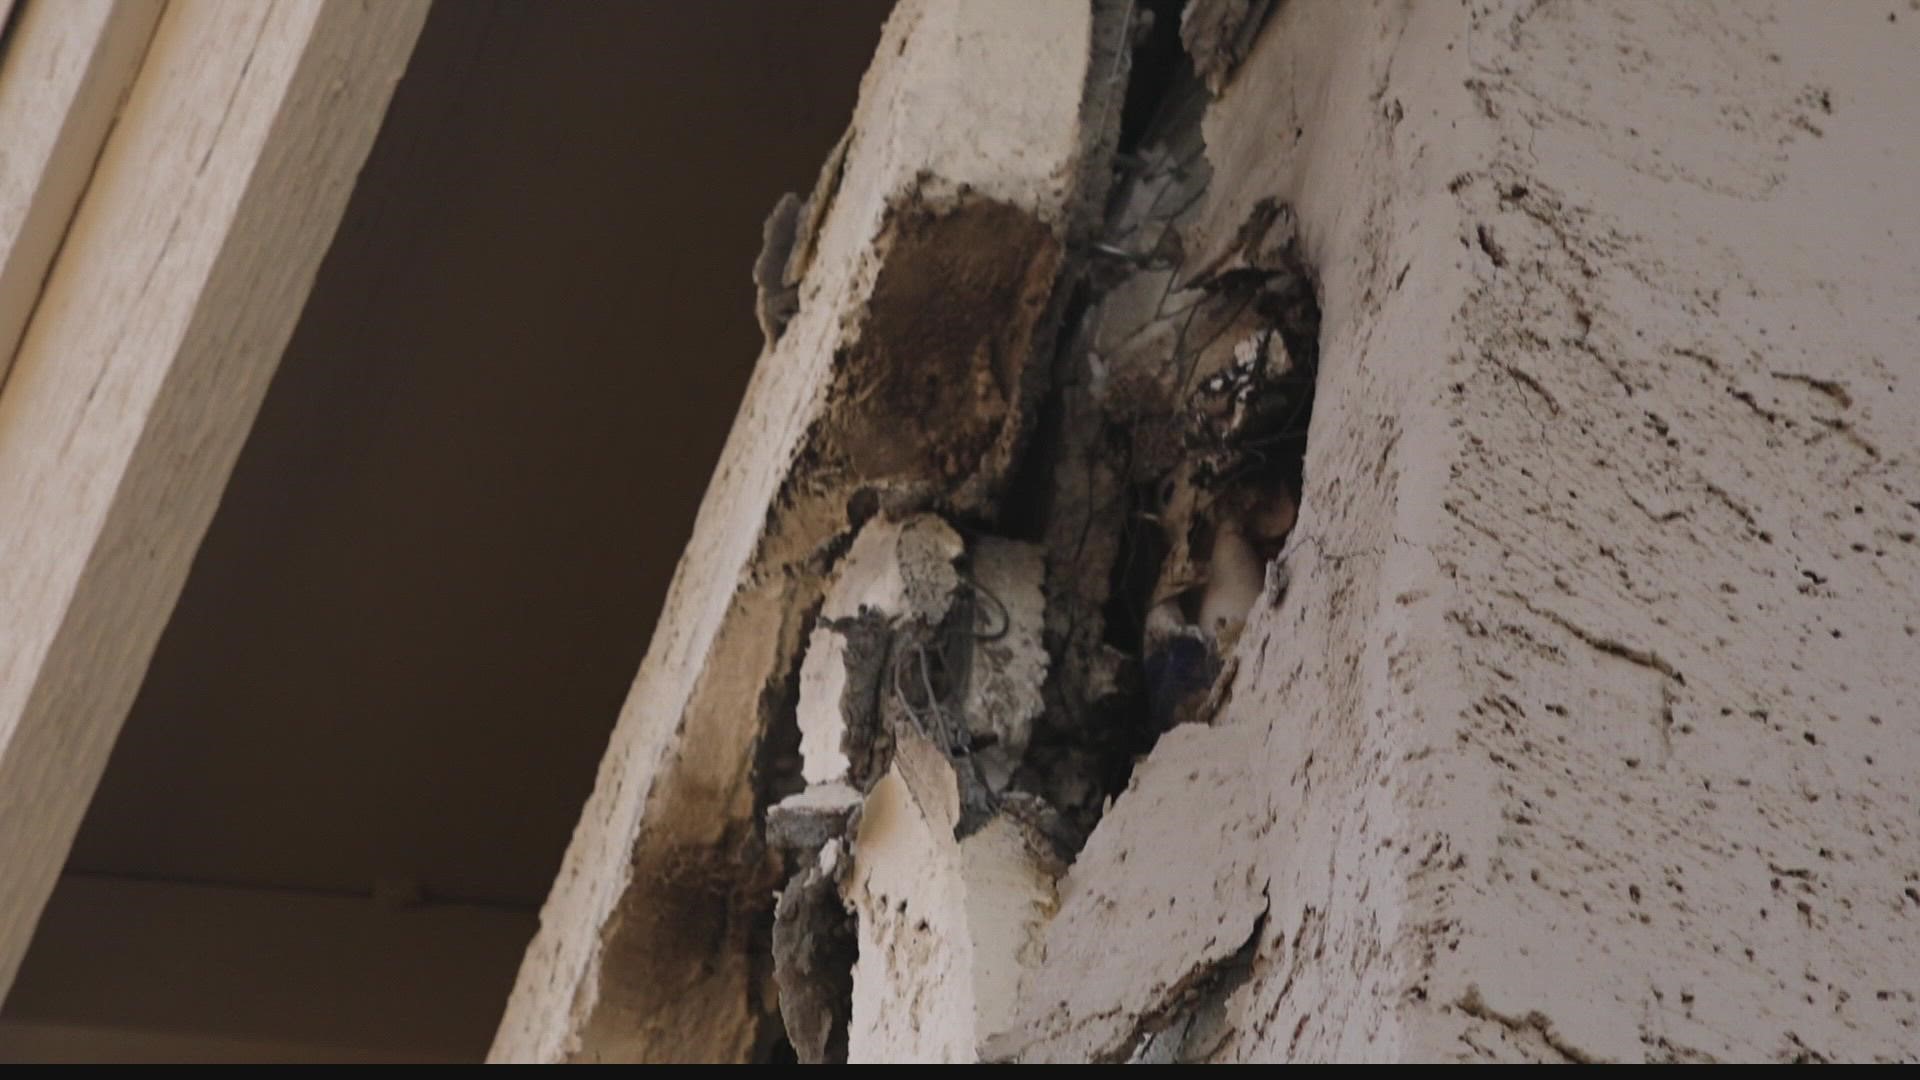 It was a frightening end to a July 4 celebration for a family in the East Valley after a large firework came flying into their home, landing just feet away from thei